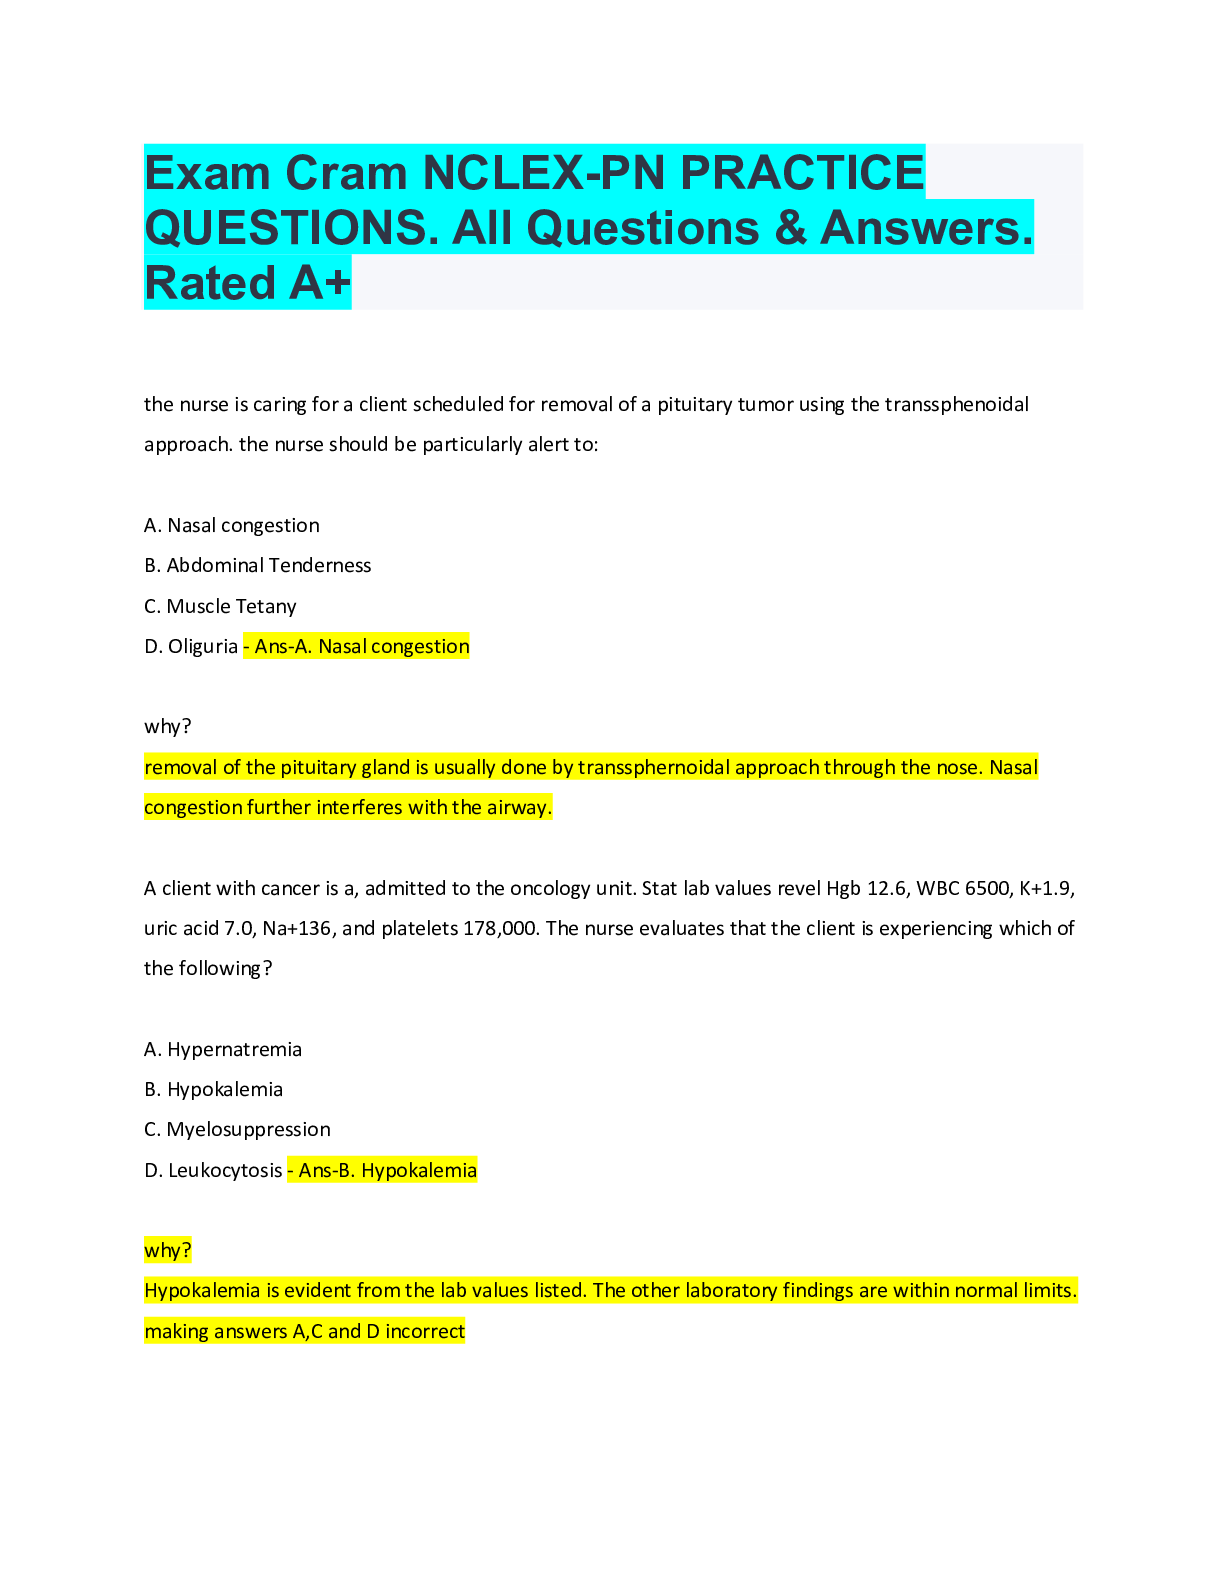 Exam Cram NCLEXPN PRACTICE QUESTIONS. All Questions & Answers. Rated A+